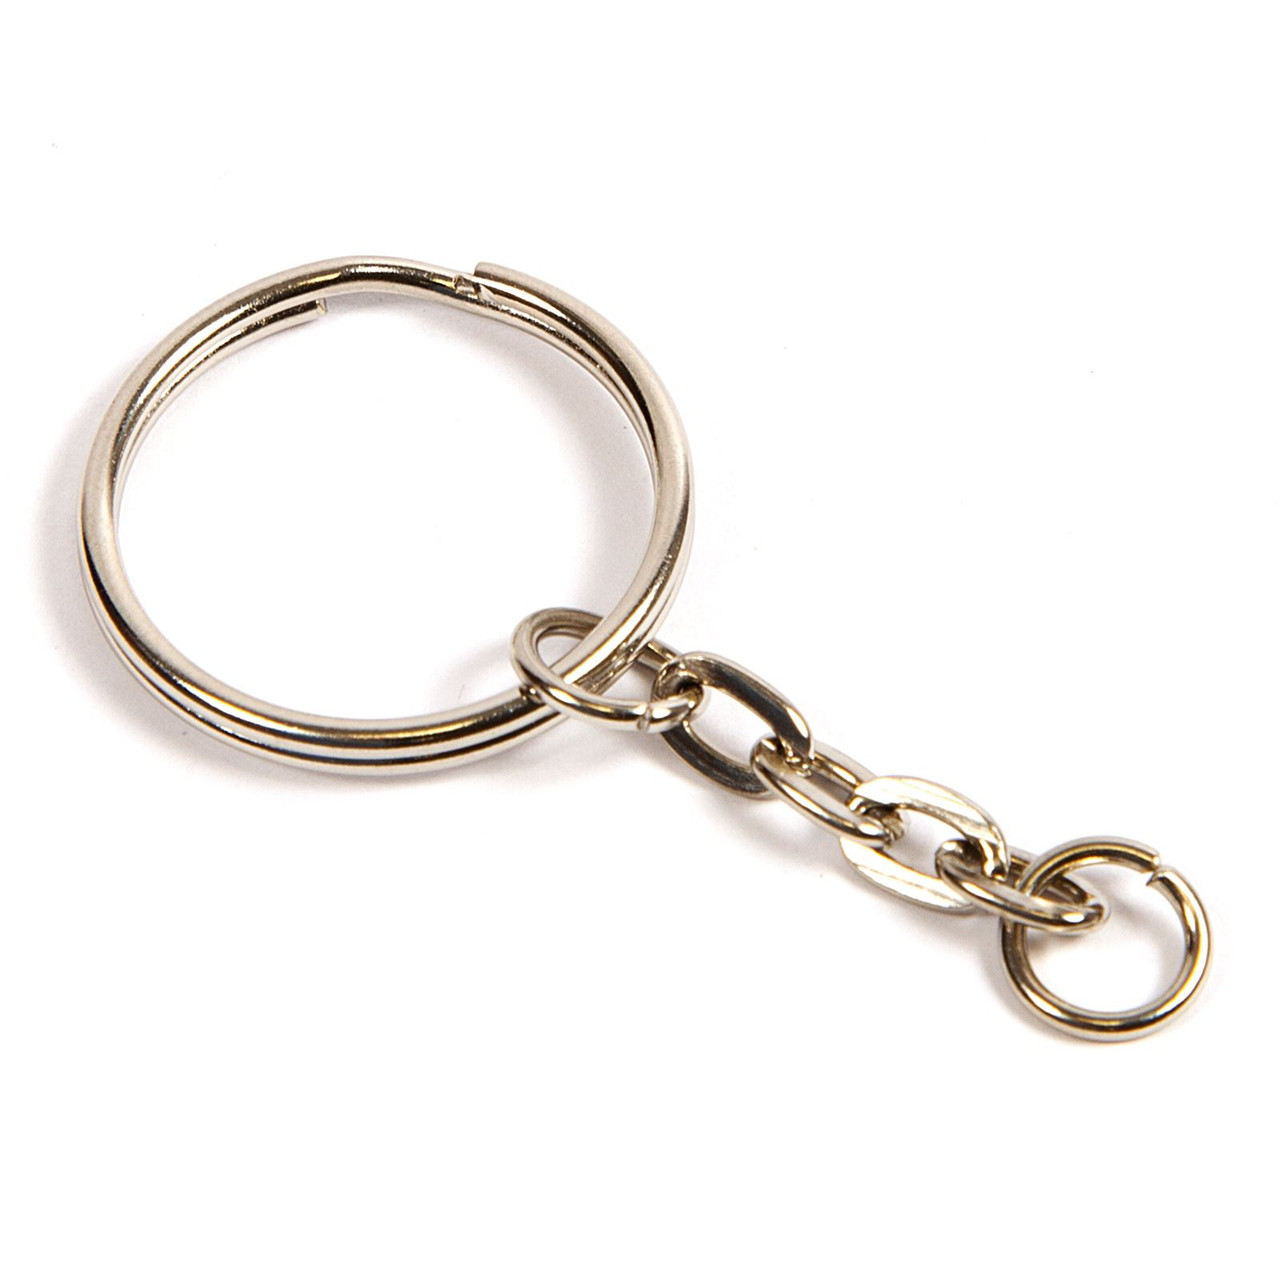 Cousin Key Ring with Clip, Adult Unisex, Size: One Size